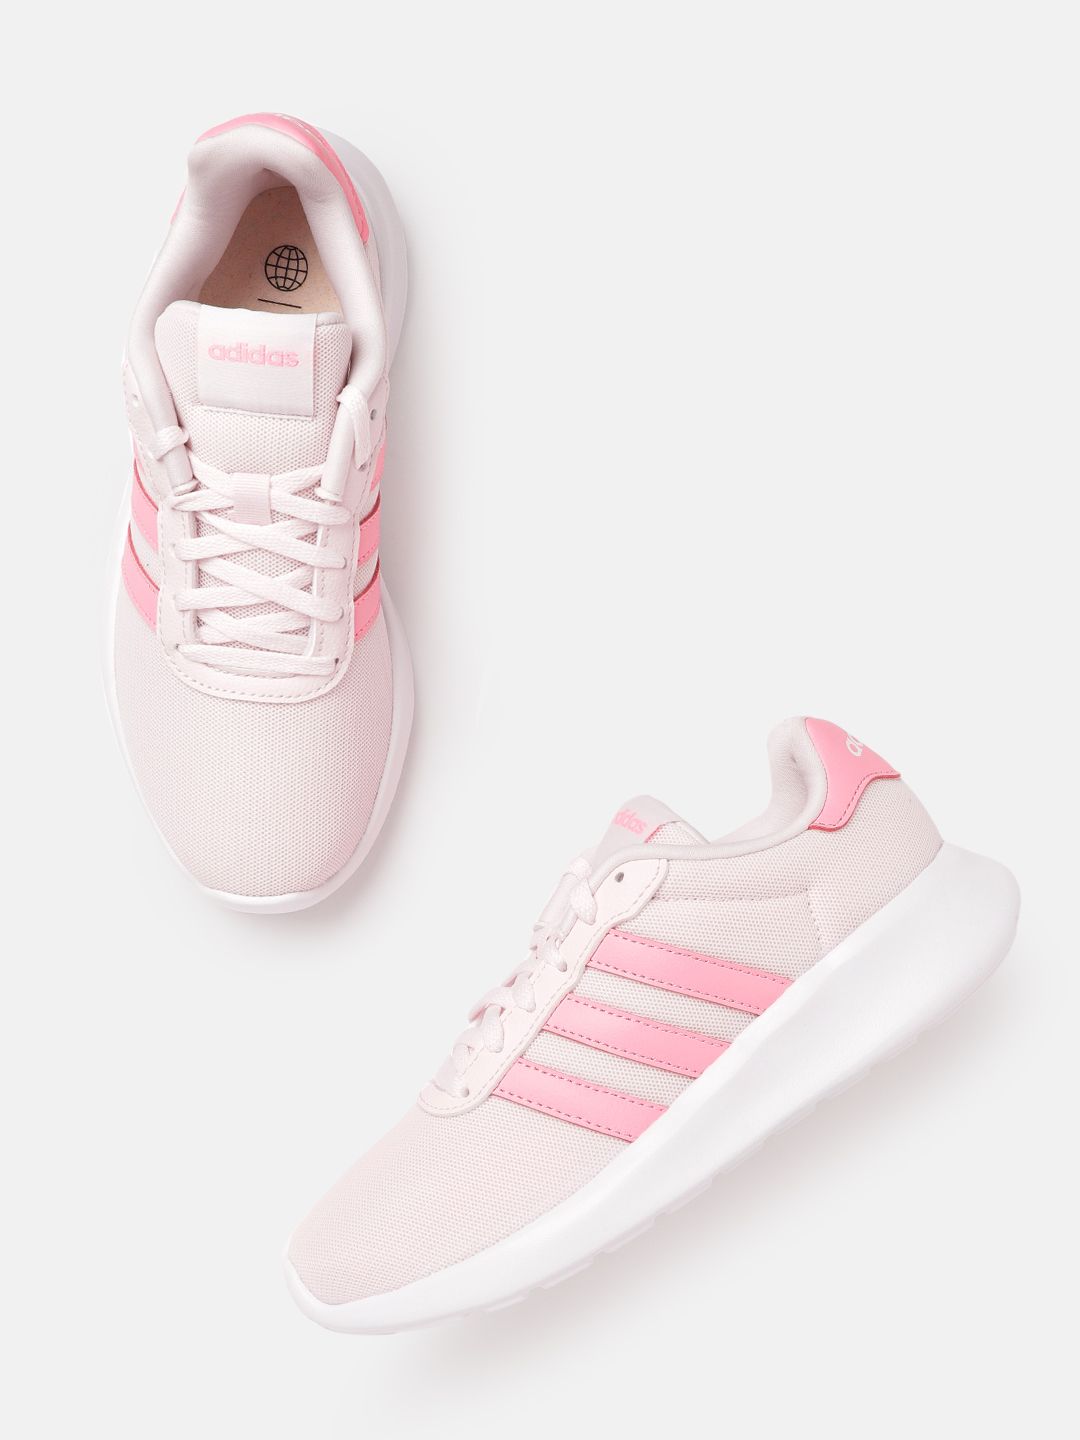 ADIDAS Women Pink Woven Design Lite Racer 3.0 Running Shoes Price in India